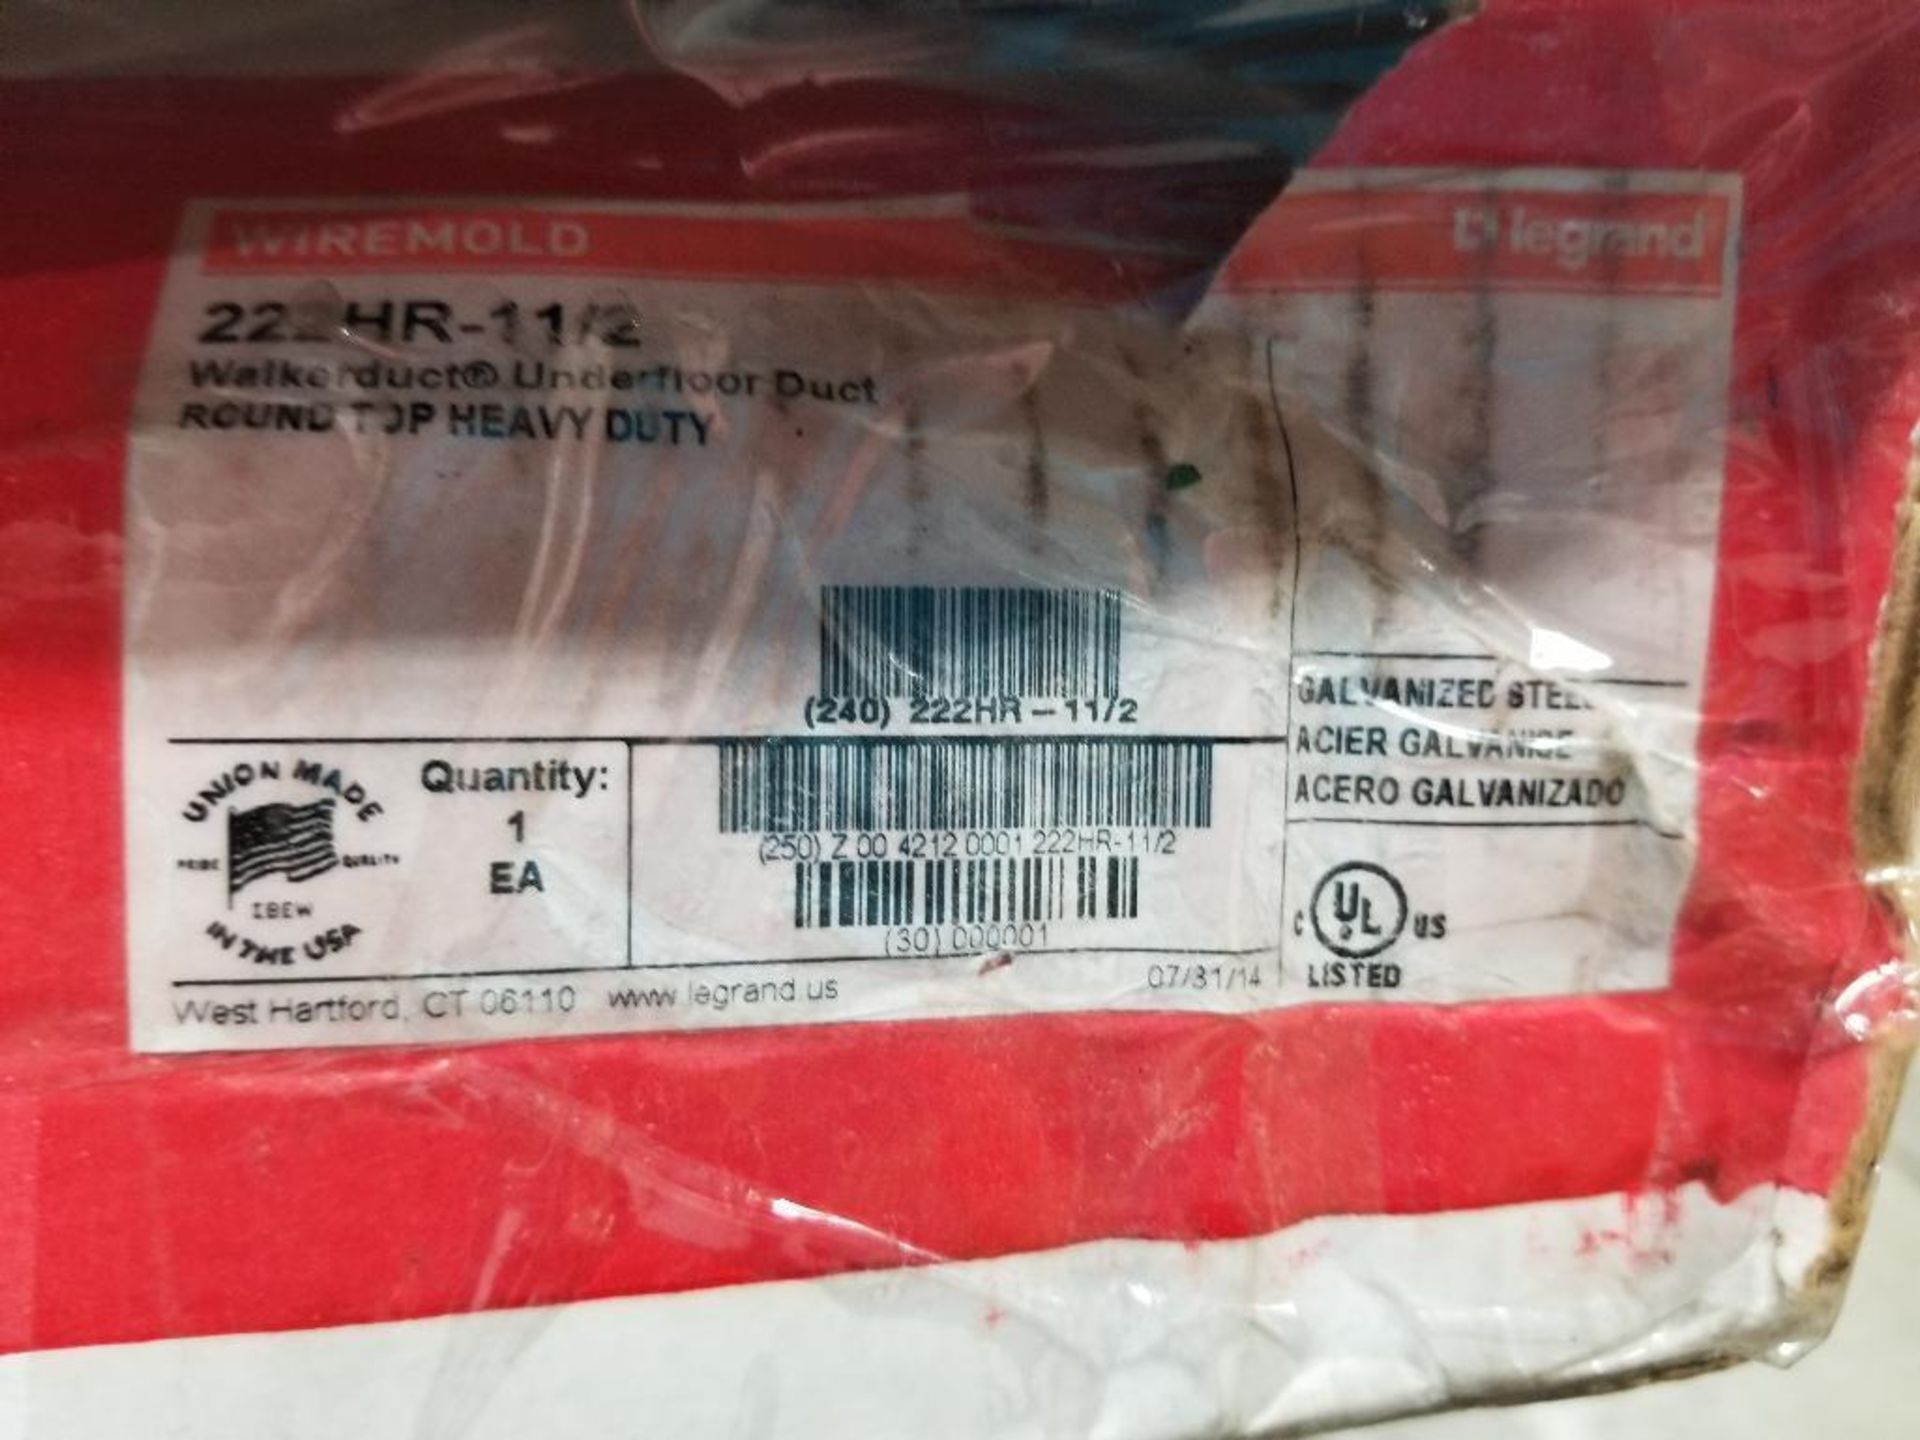 LeGrand wiremold Walkerduct underfloor duct. Part number 222HR-11/2. New in box. - Image 2 of 2